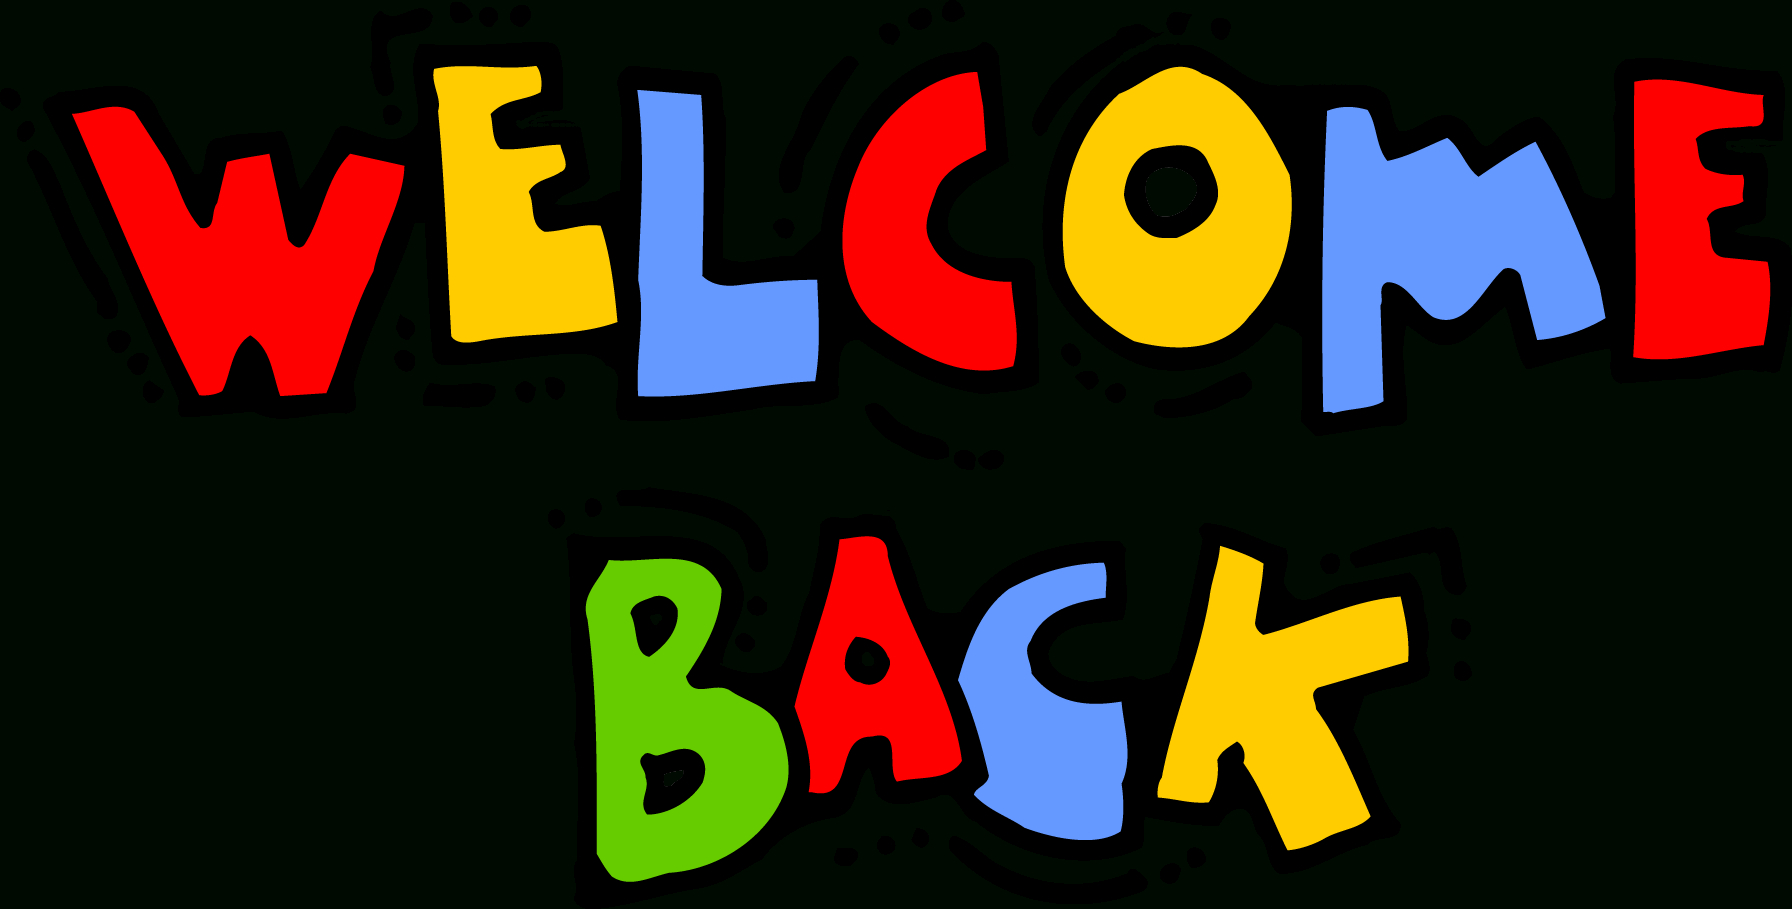 free-printable-welcome-back-sign